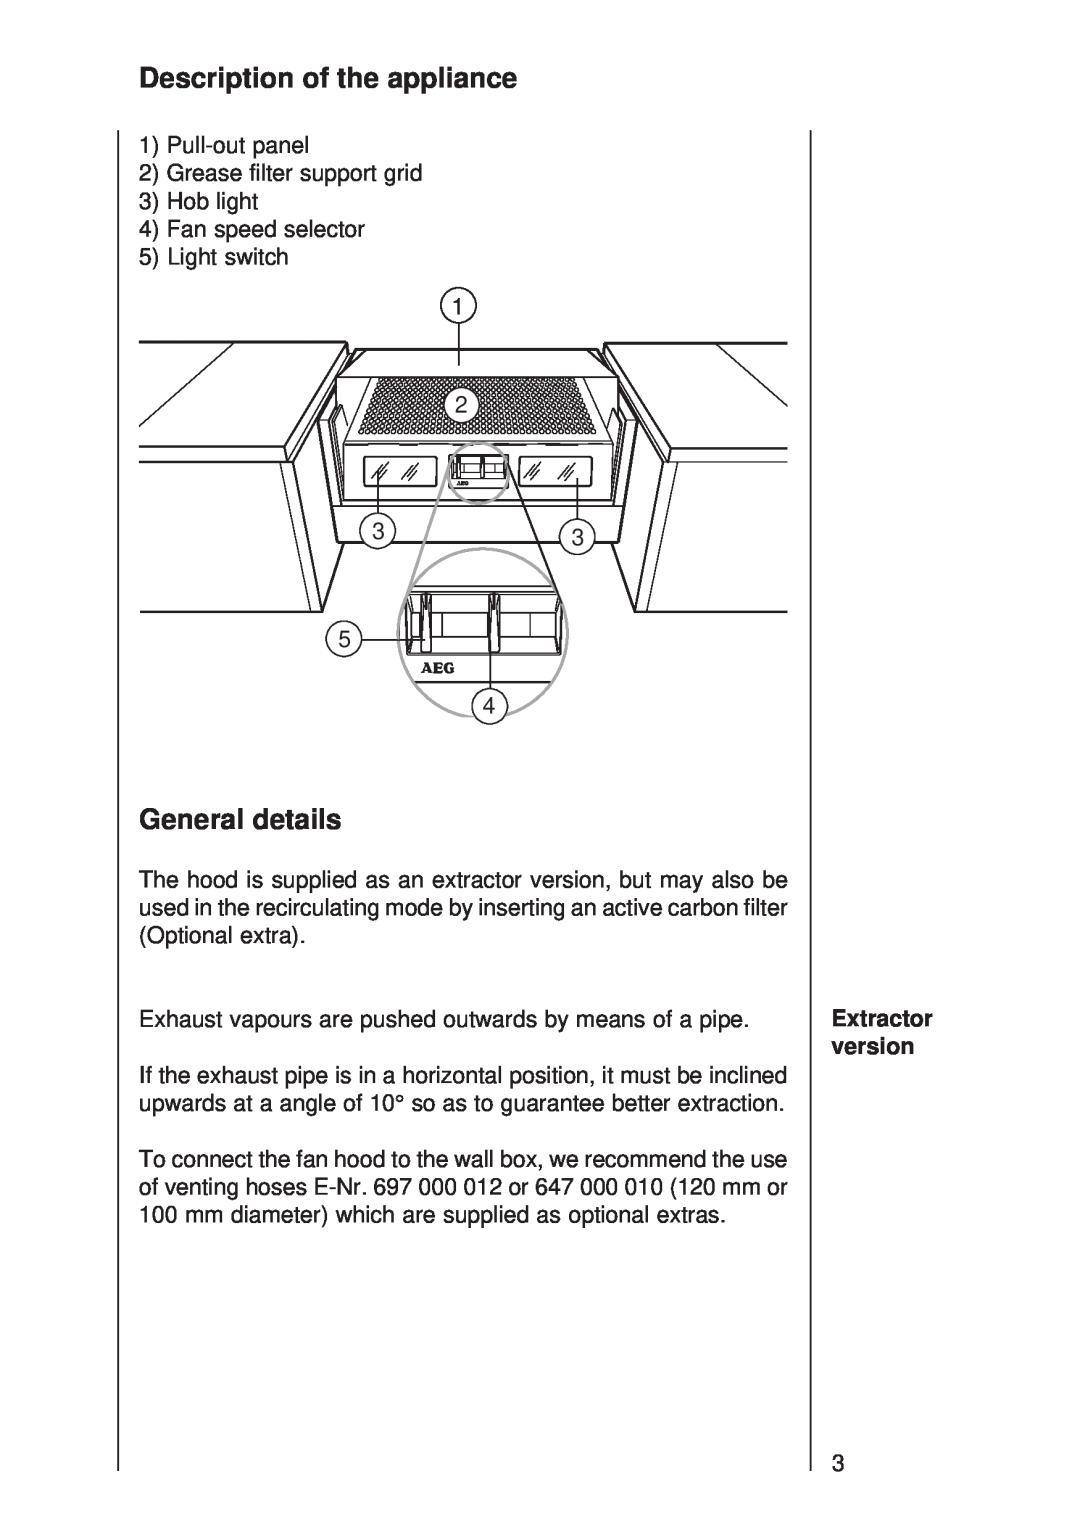 Electrolux 335 D operating instructions Description of the appliance, General details, Extractor version 